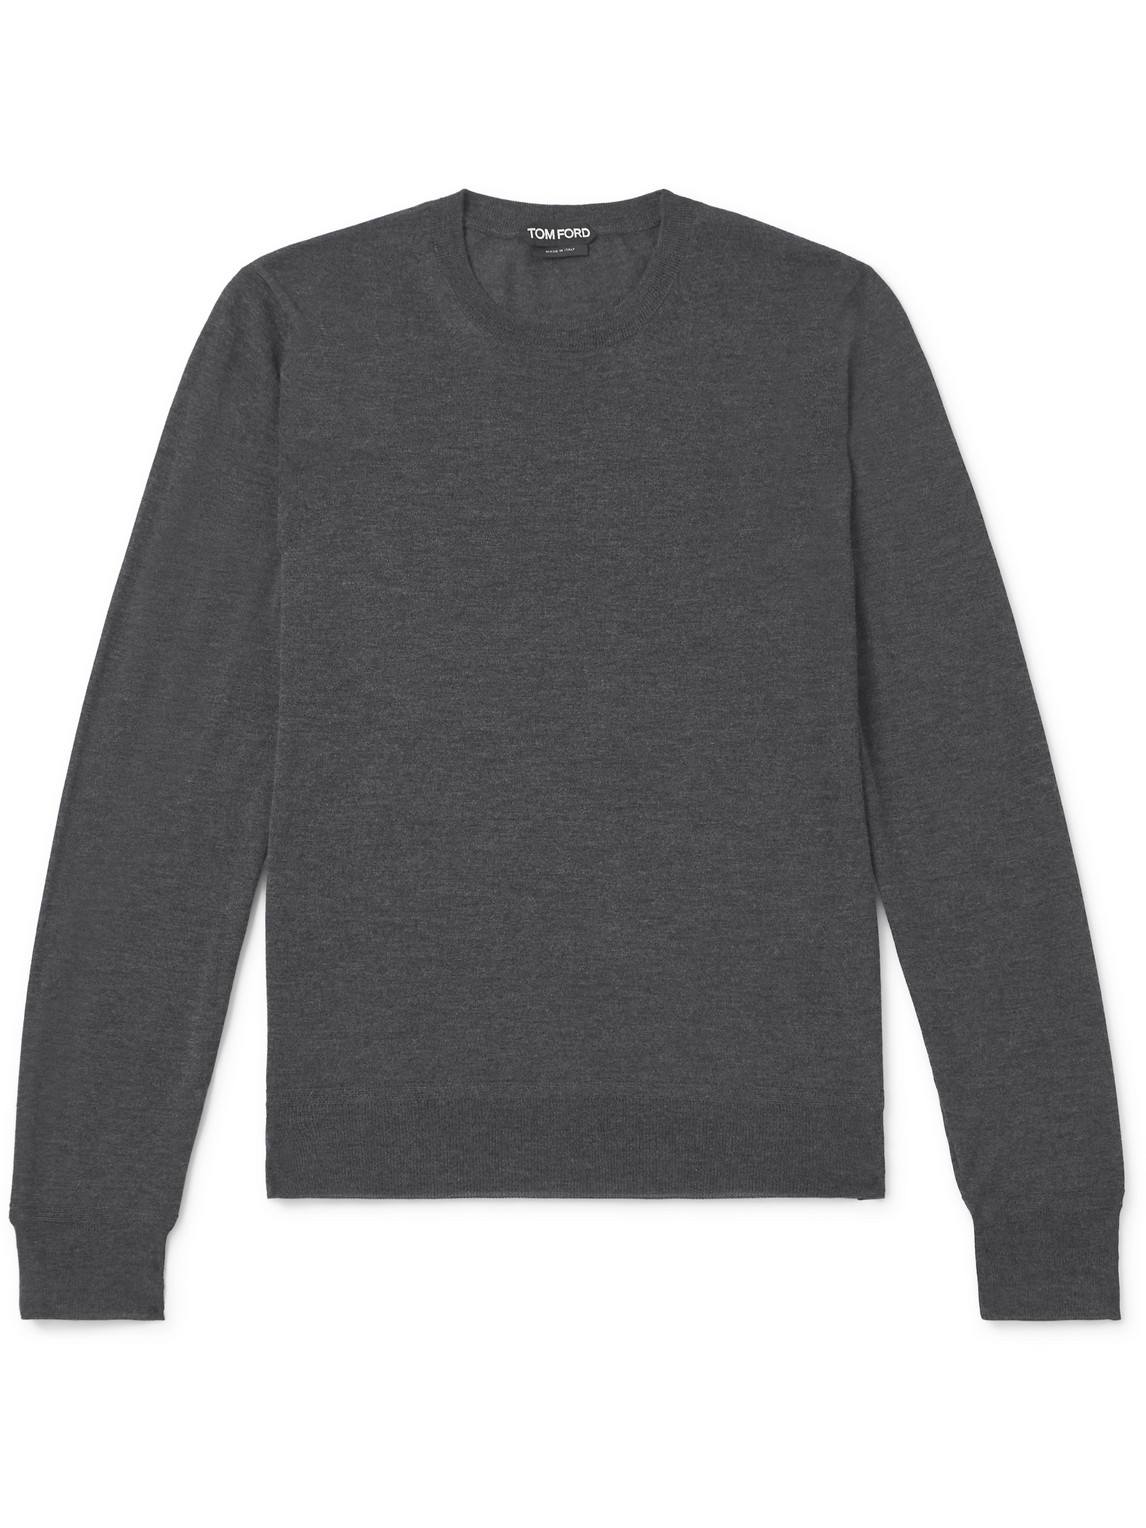 Tom Ford Cashmere And Silk-blend Sweater In Gray